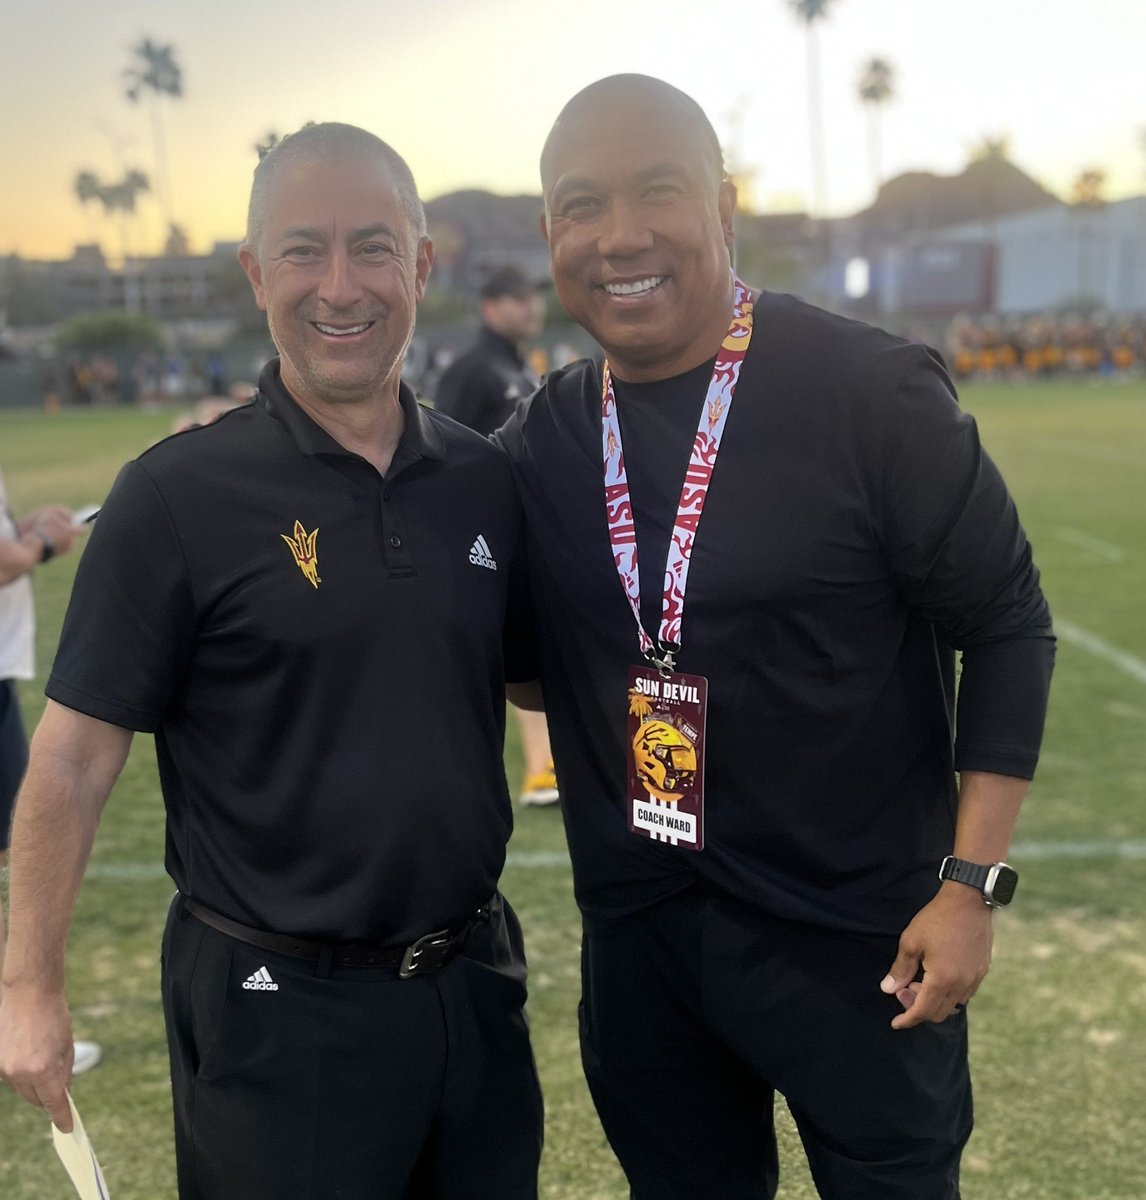 Welcome to Tempe @mvp86hinesward !!! Today is an awesome day.